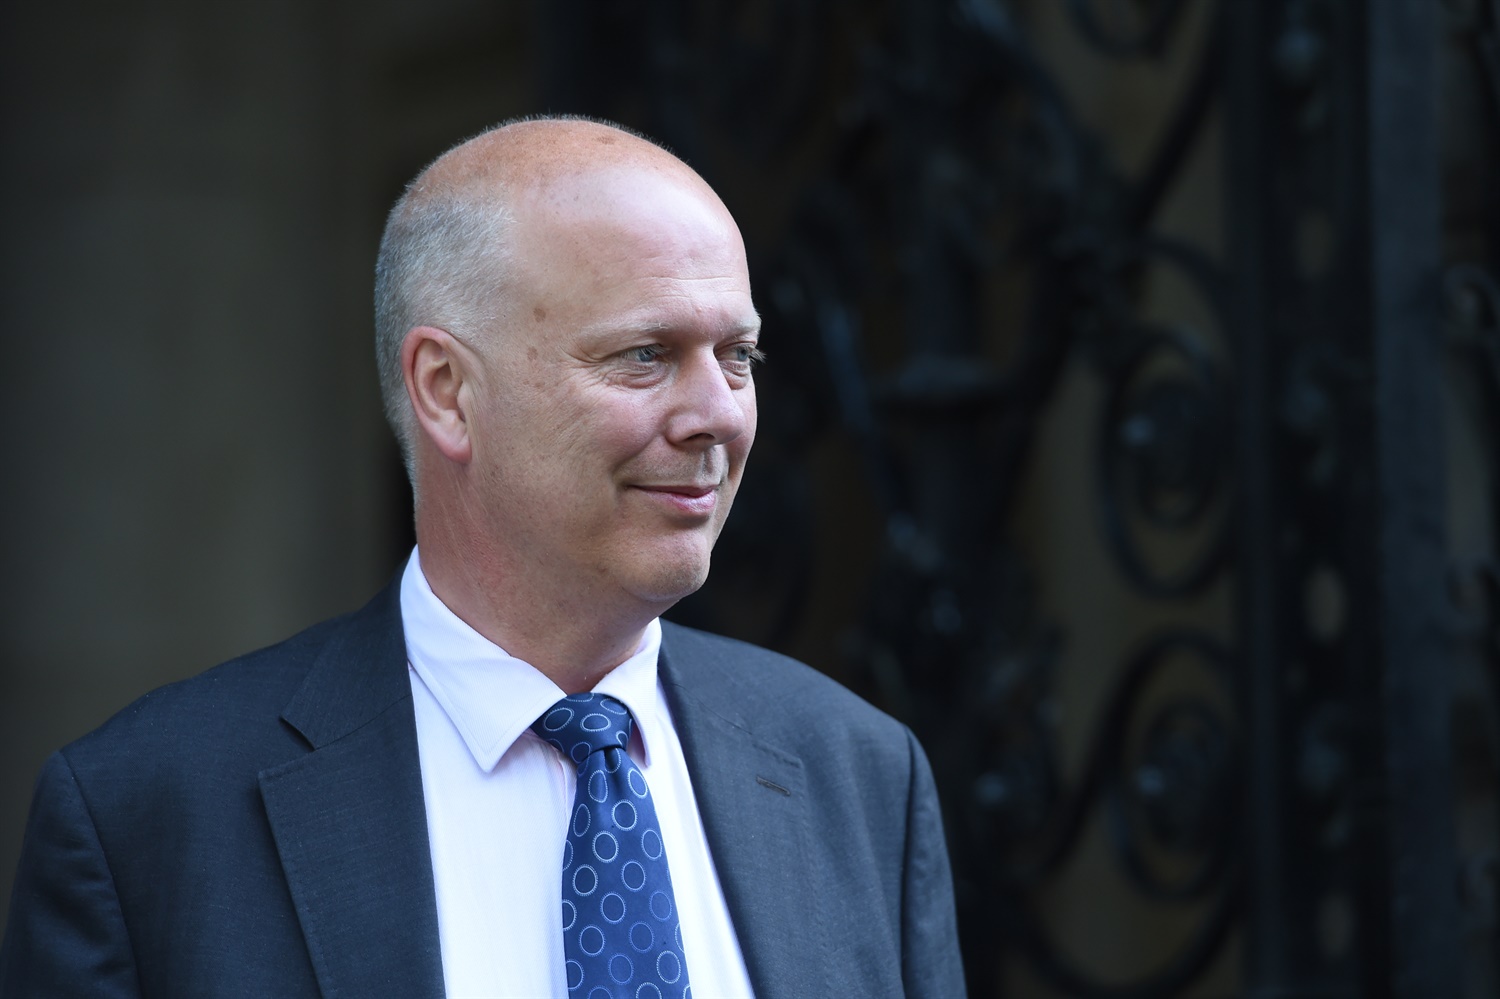 Grayling questioned over second extension of ORR chair’s post